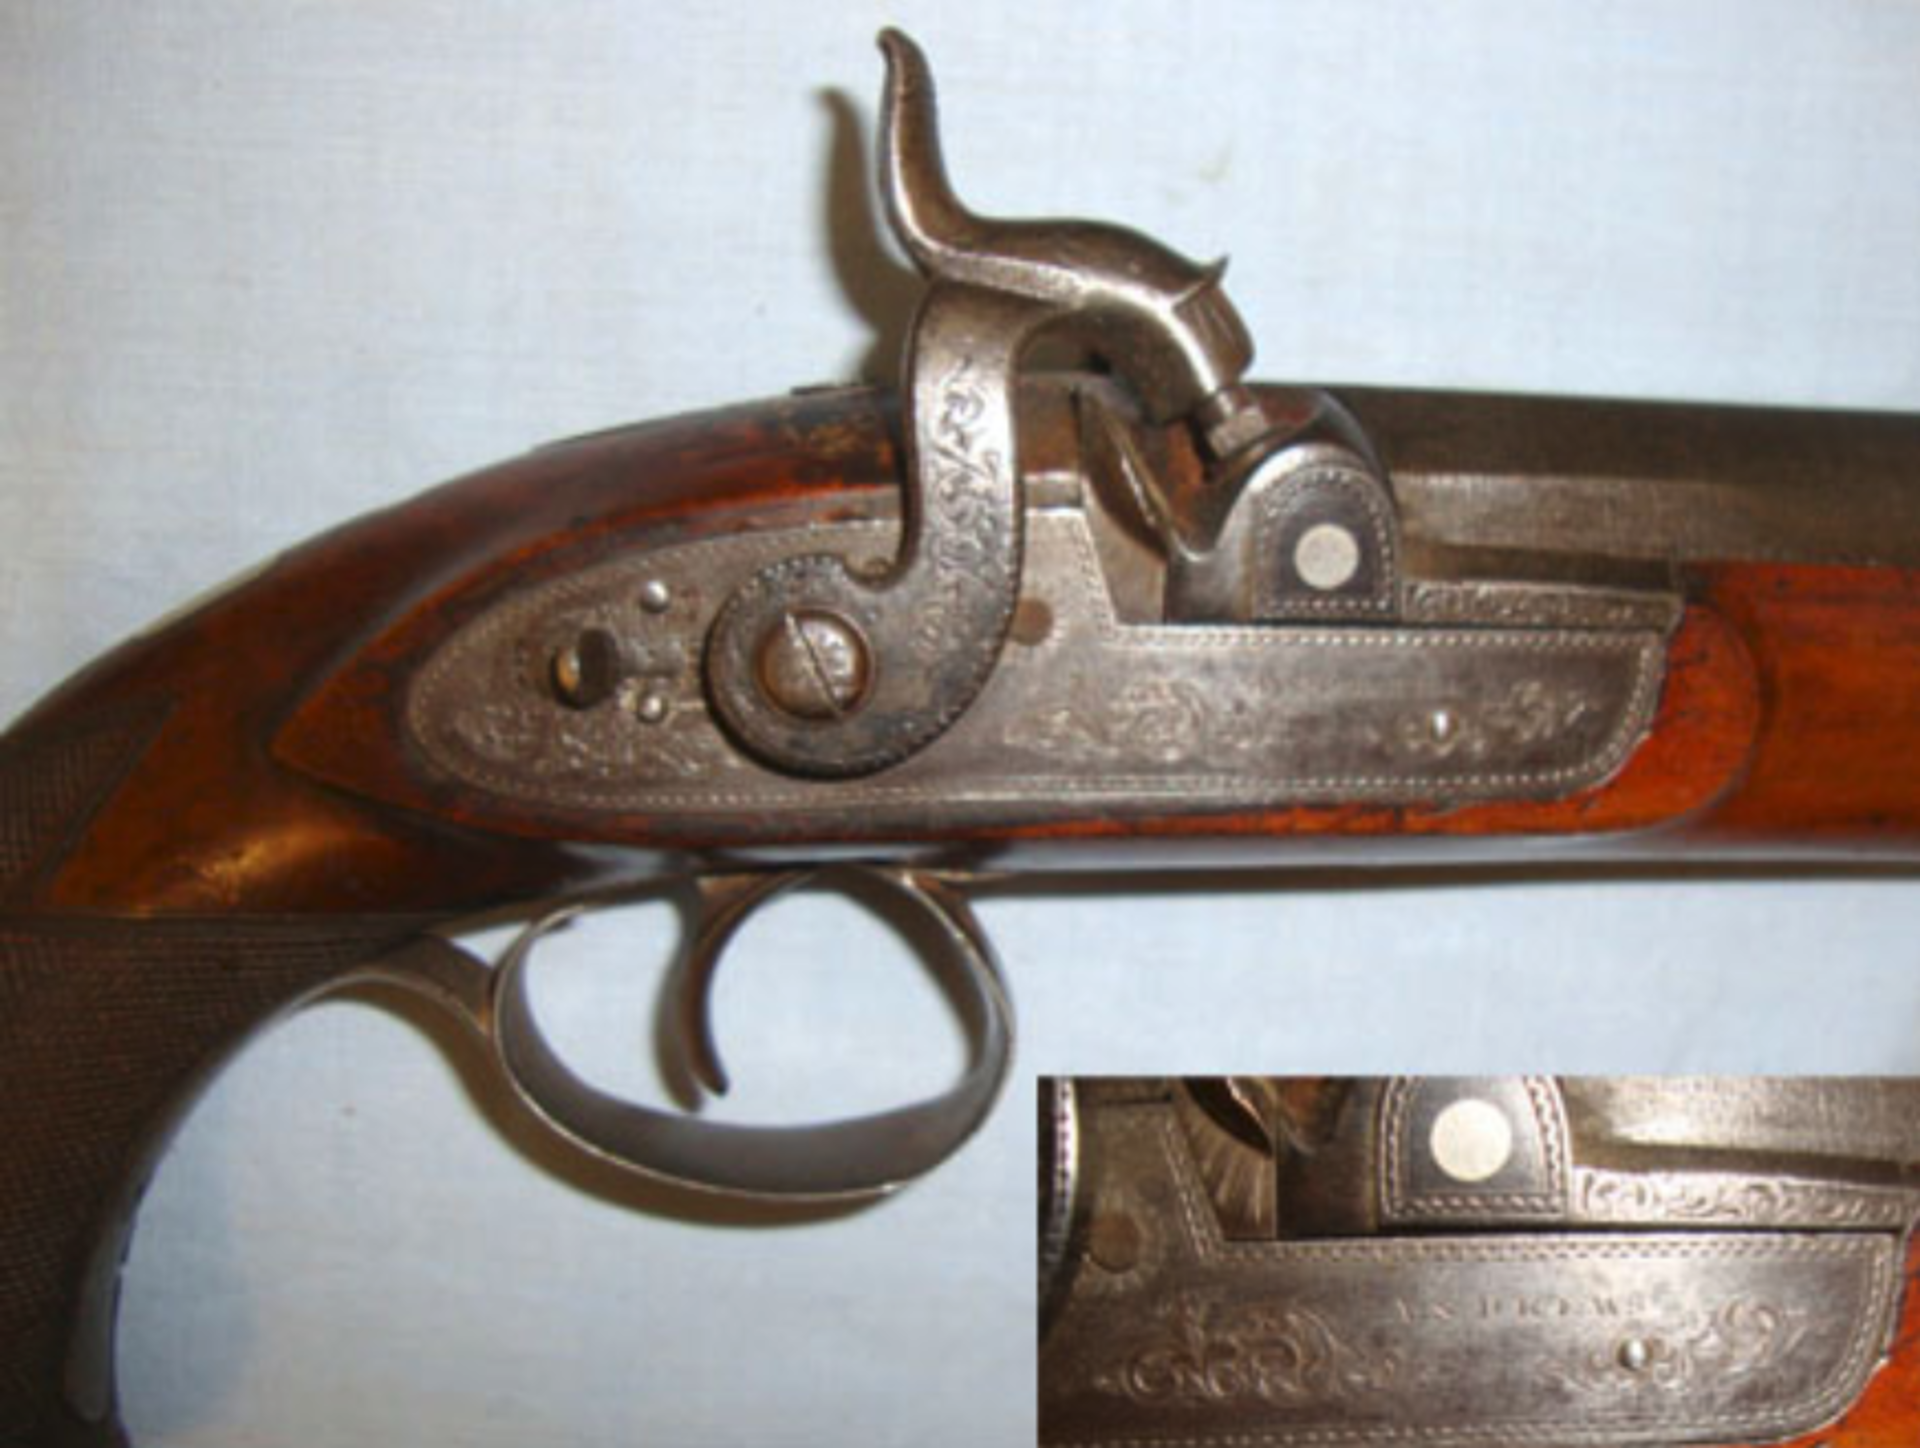 1821-1868 English .700 Bore Percussion Duelling / Holster Pistol By Andrews Pall Mall London. - Image 3 of 3